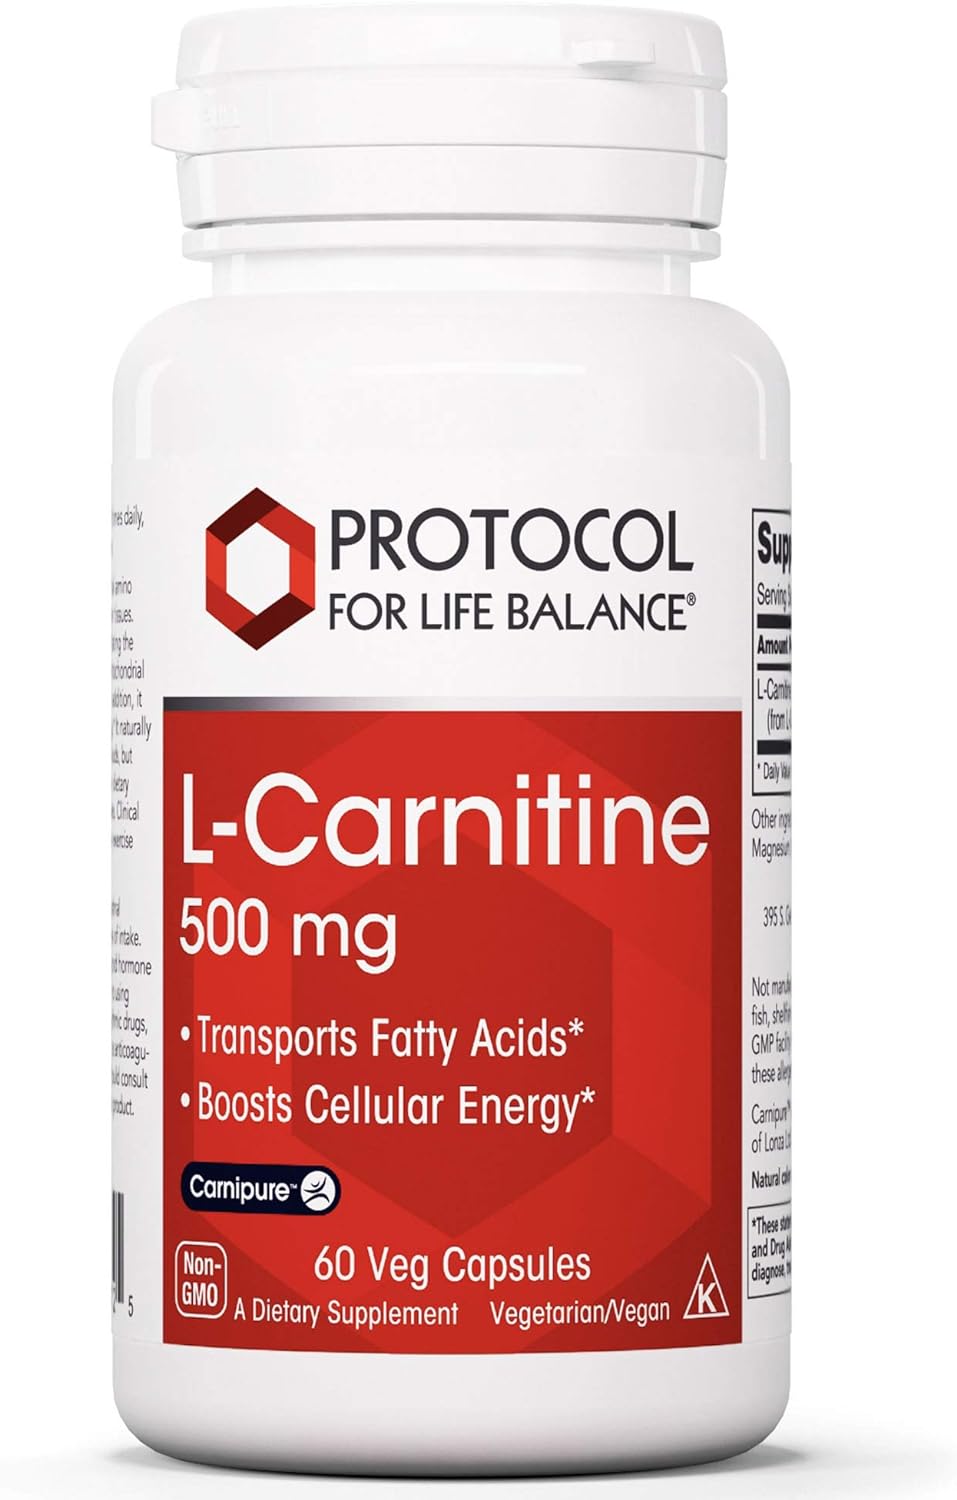 Protocol L-Carnitine 500mg - Supports Metabolic Health, Energy Product